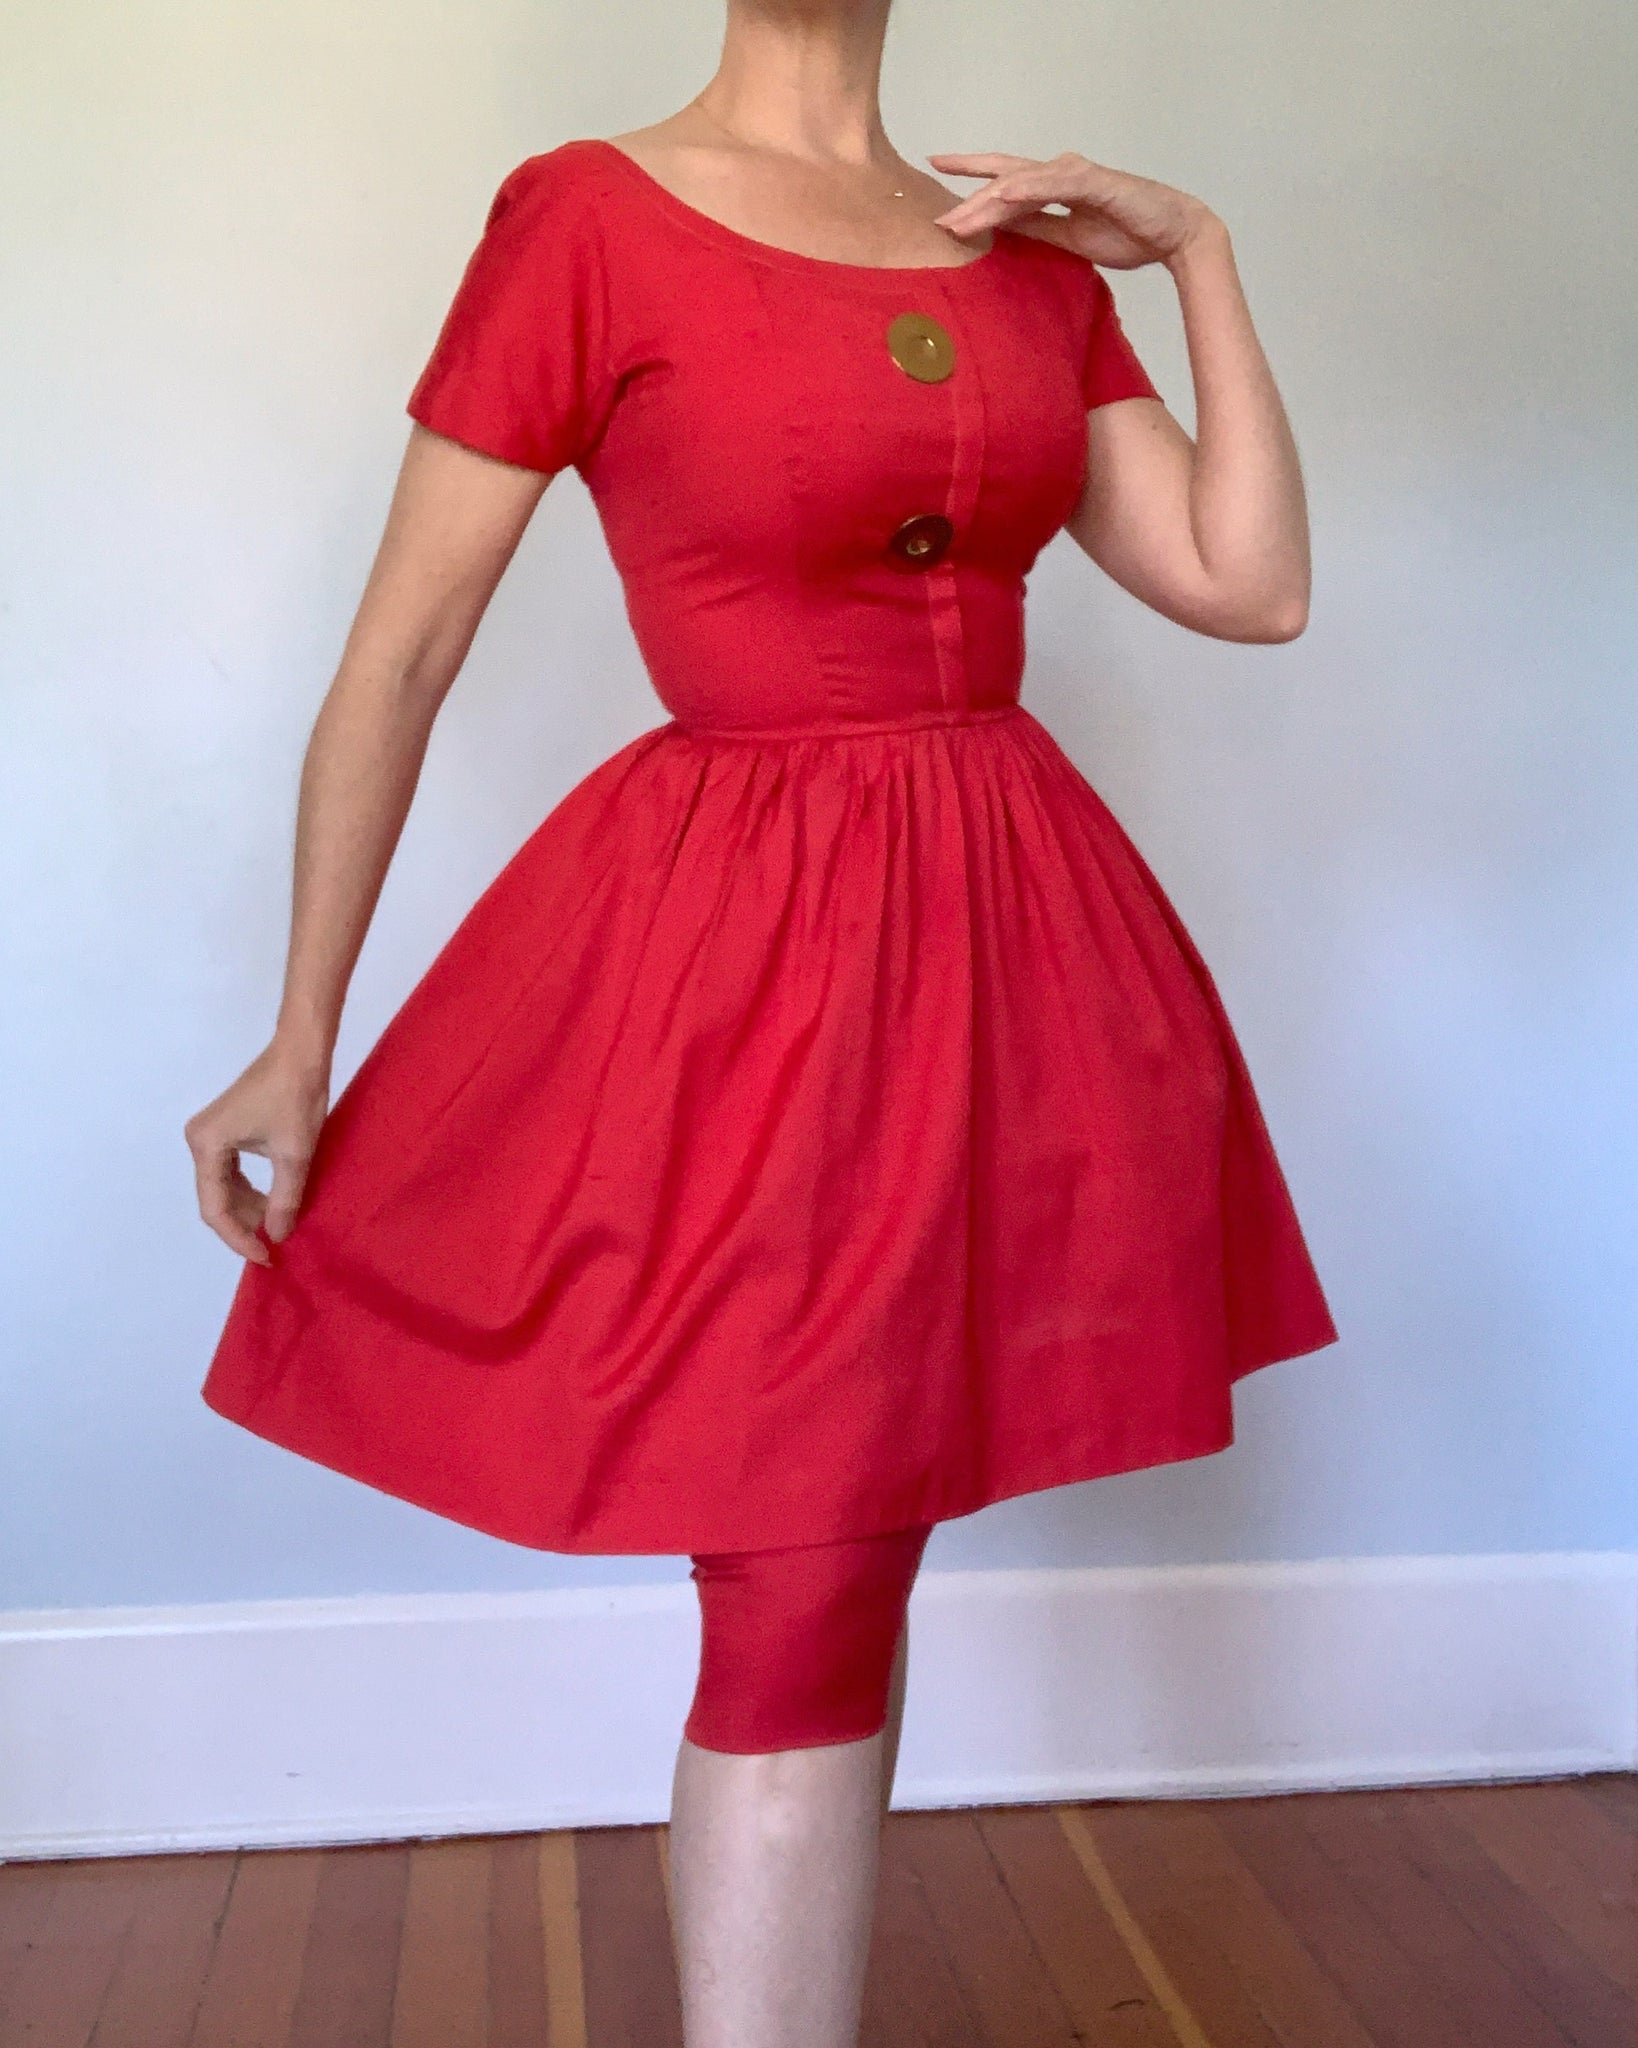 1950s Couture-Inspired Raw Nubby Cotton Hourglass Cocktail Dress with 3D Over-Skirt by "Gigi Young New York"